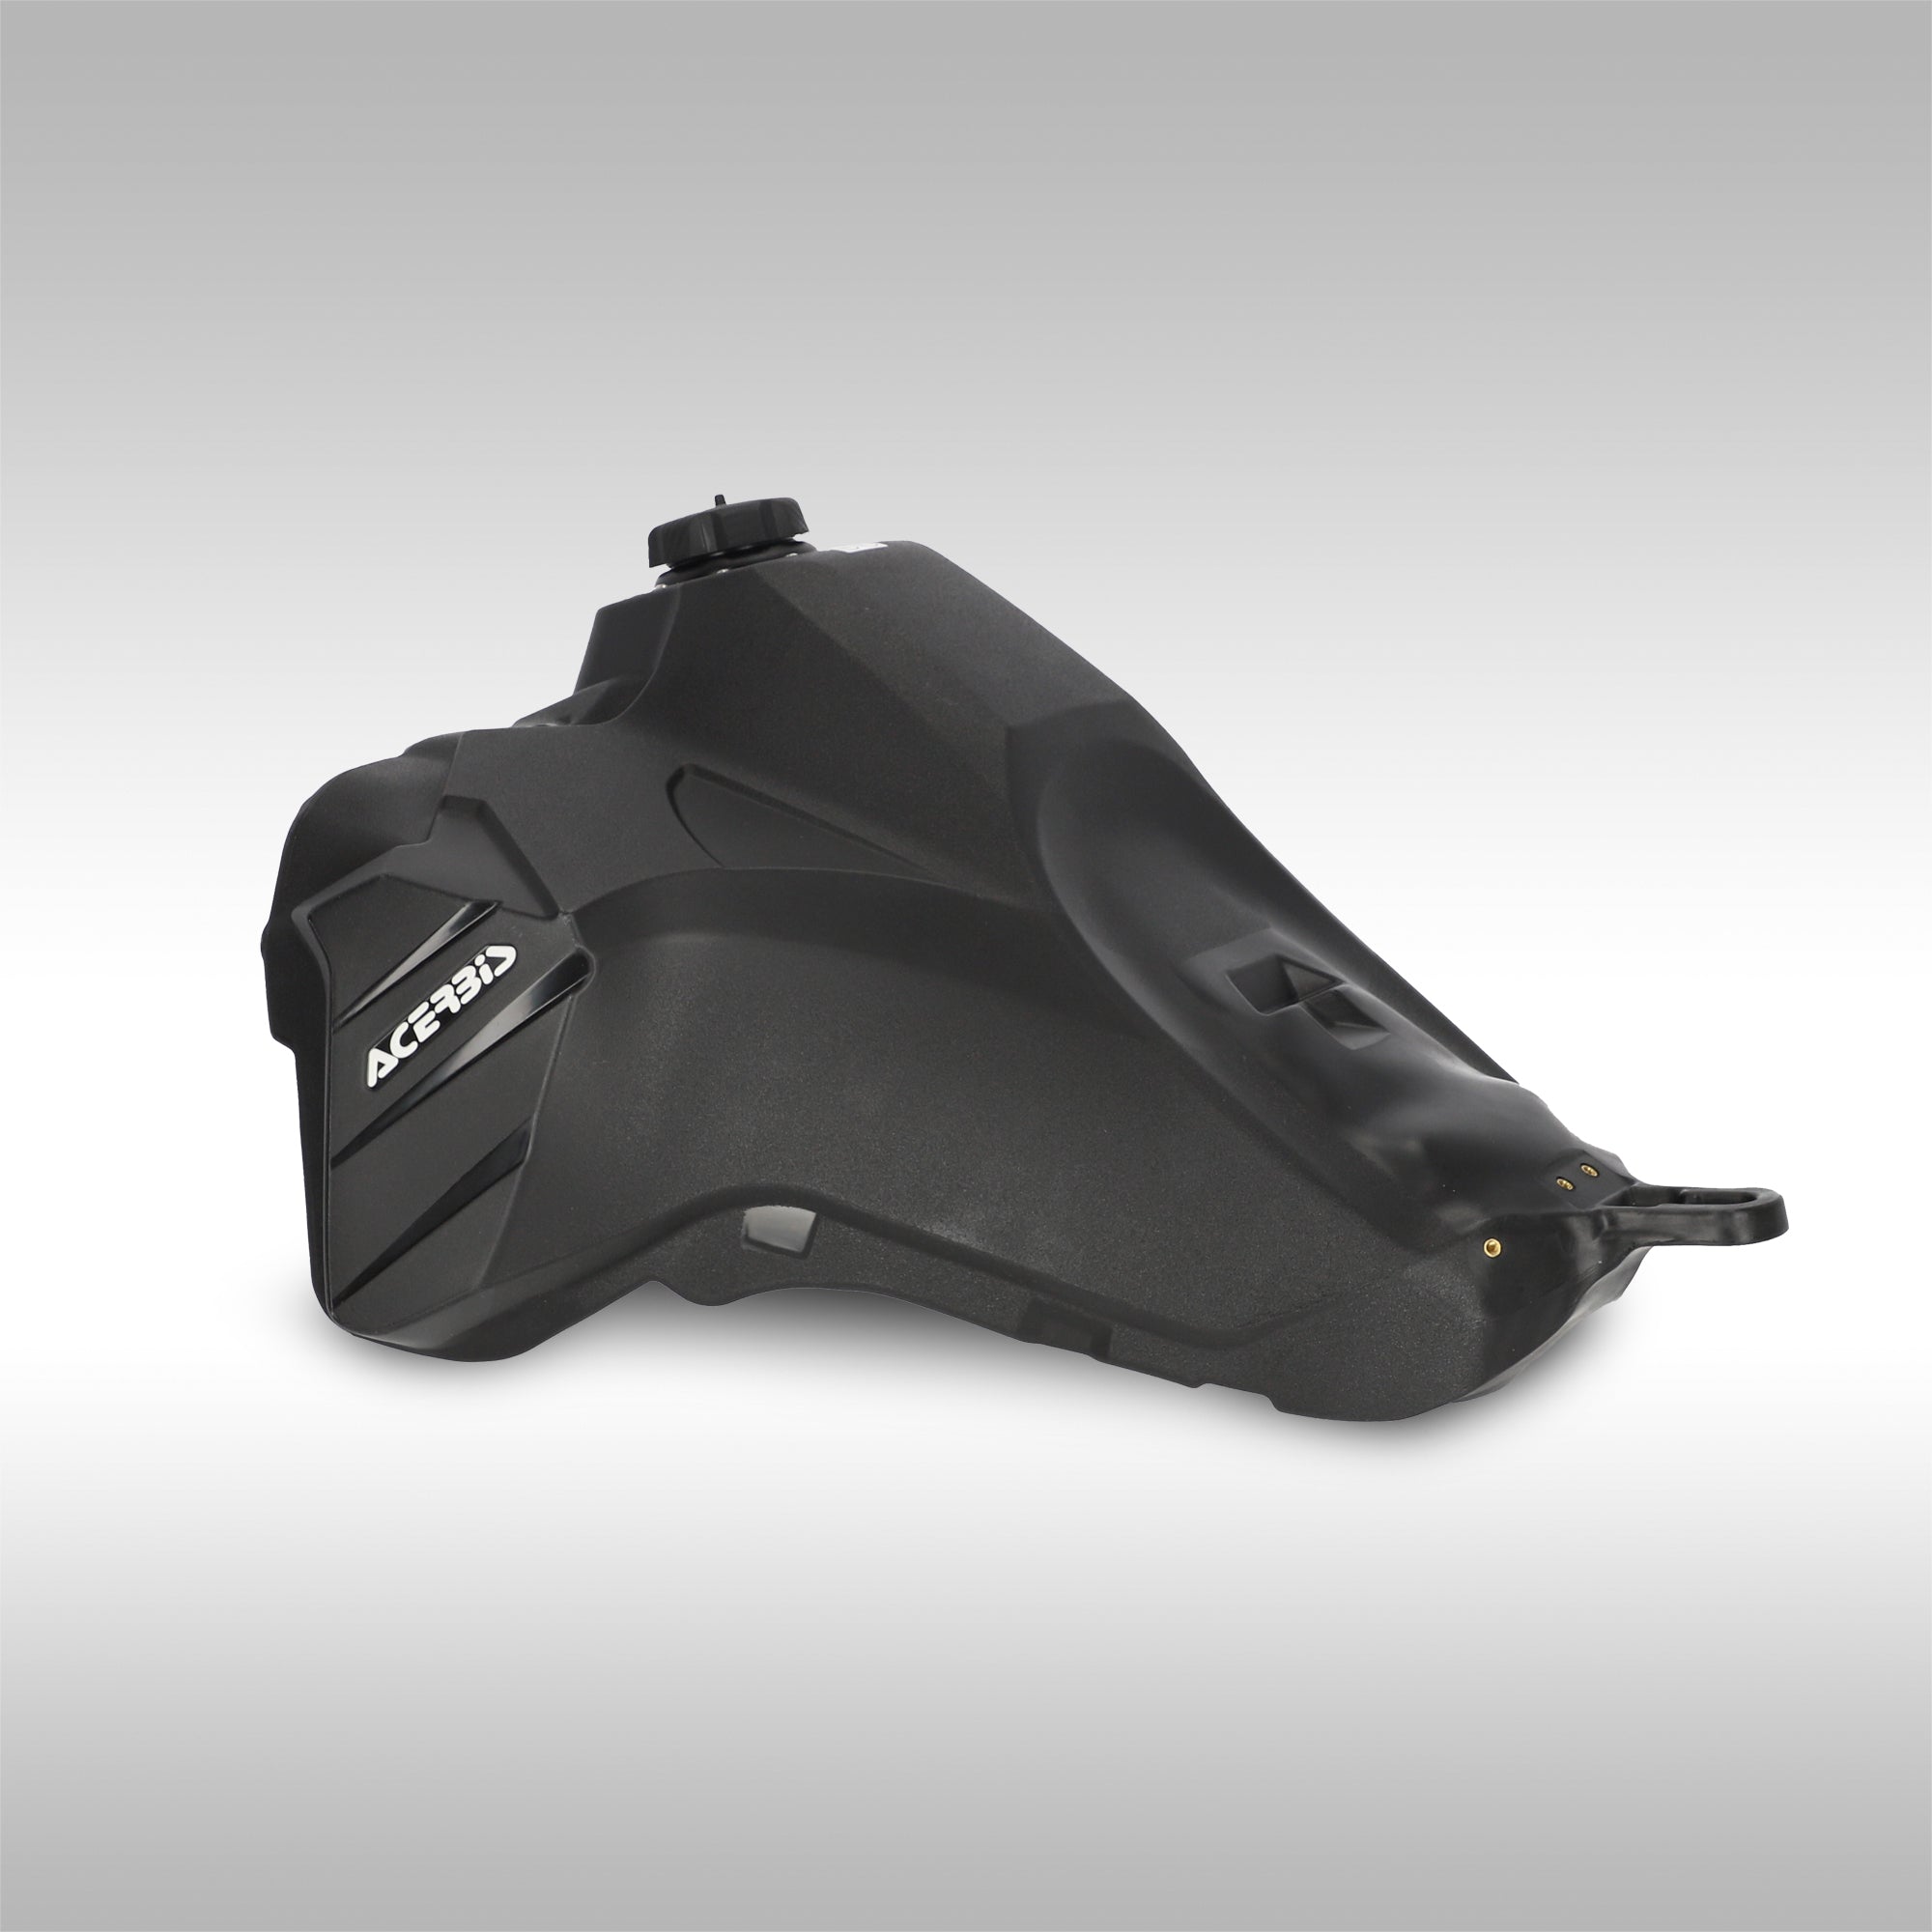 Larger Honda Africa Twin 1100L fuel tank. Aftermarket fuel tank from Acerbis will increase the fuel capacity of your 2020 - 2023 Honda Africa Twin by 1.6 gallons to 25 liters or 6.6 gallons. Top quality Acerbis fuel tank. Honda Africa Twin dualsport adventure motorcycle.